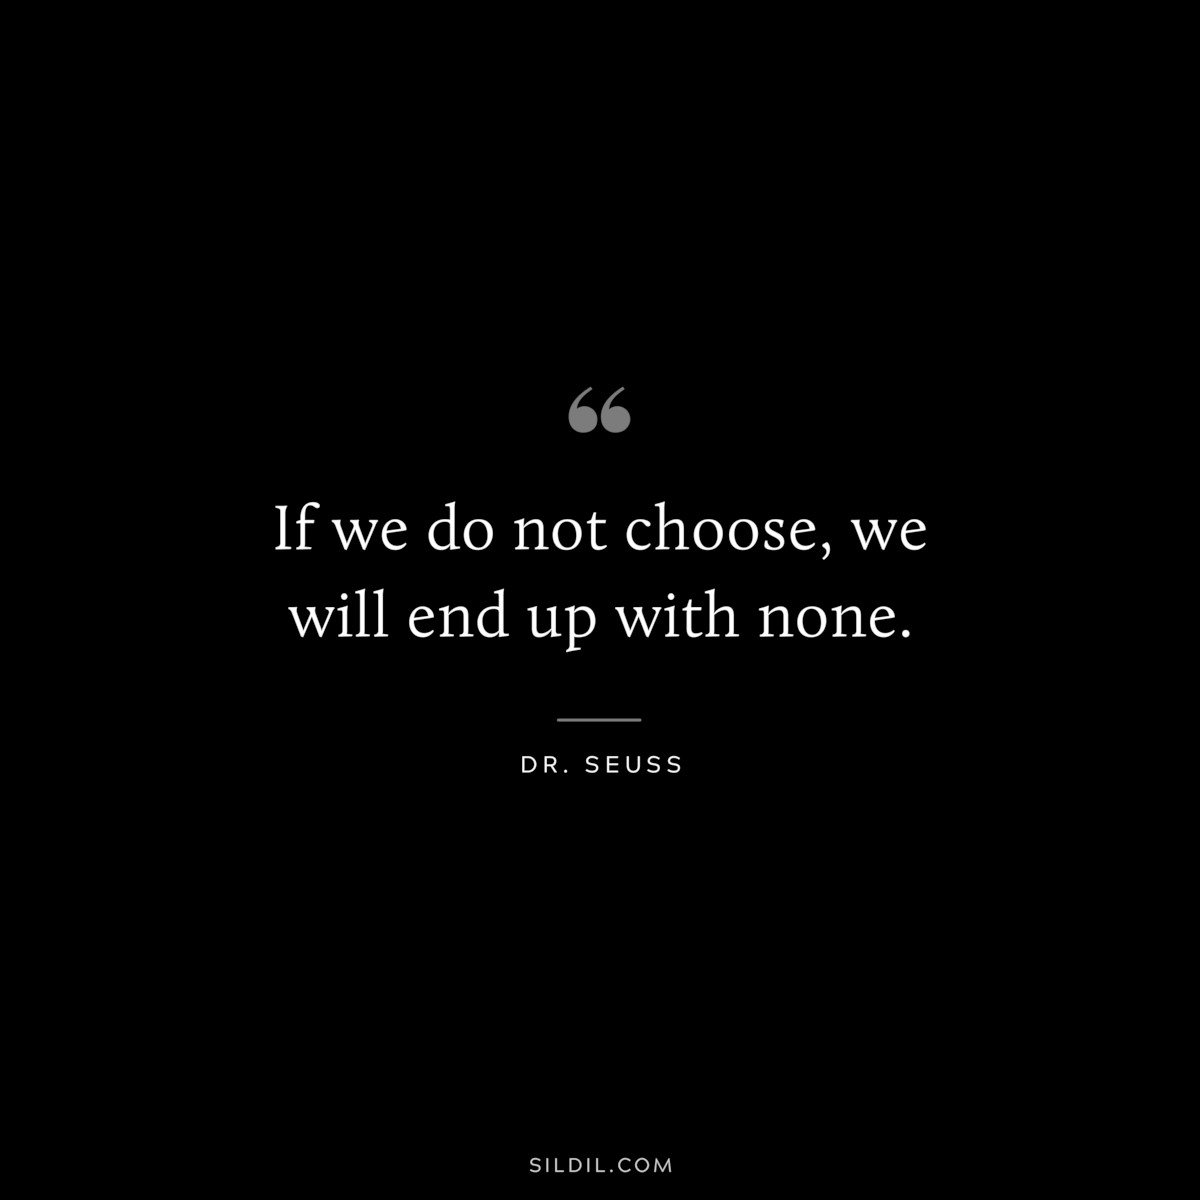 If we do not choose, we will end up with none. ― Dr. Seuss